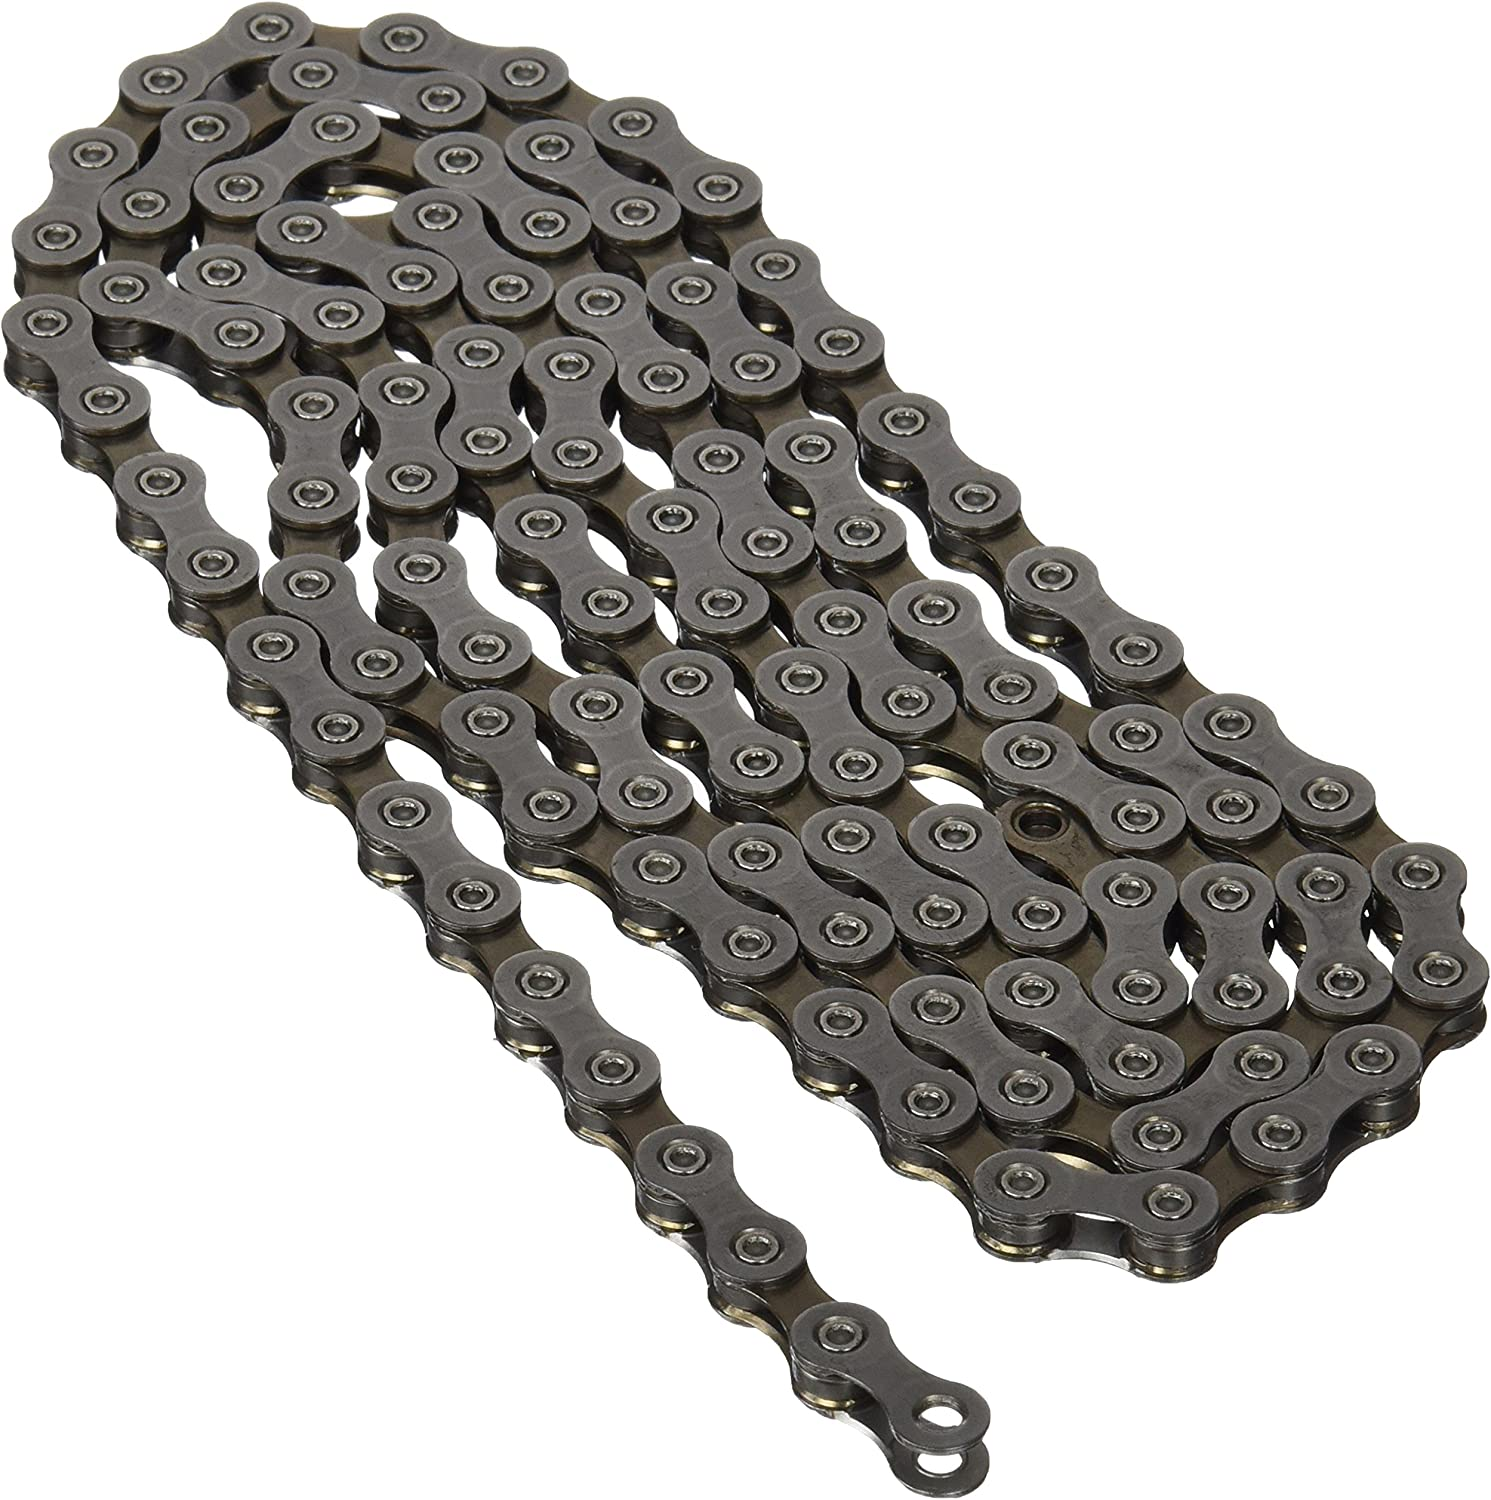 How much is a mountain bike chain? No matter how much you spend on a mountain bike chain, it will still need to be maintained properly for it to last as long as possible.